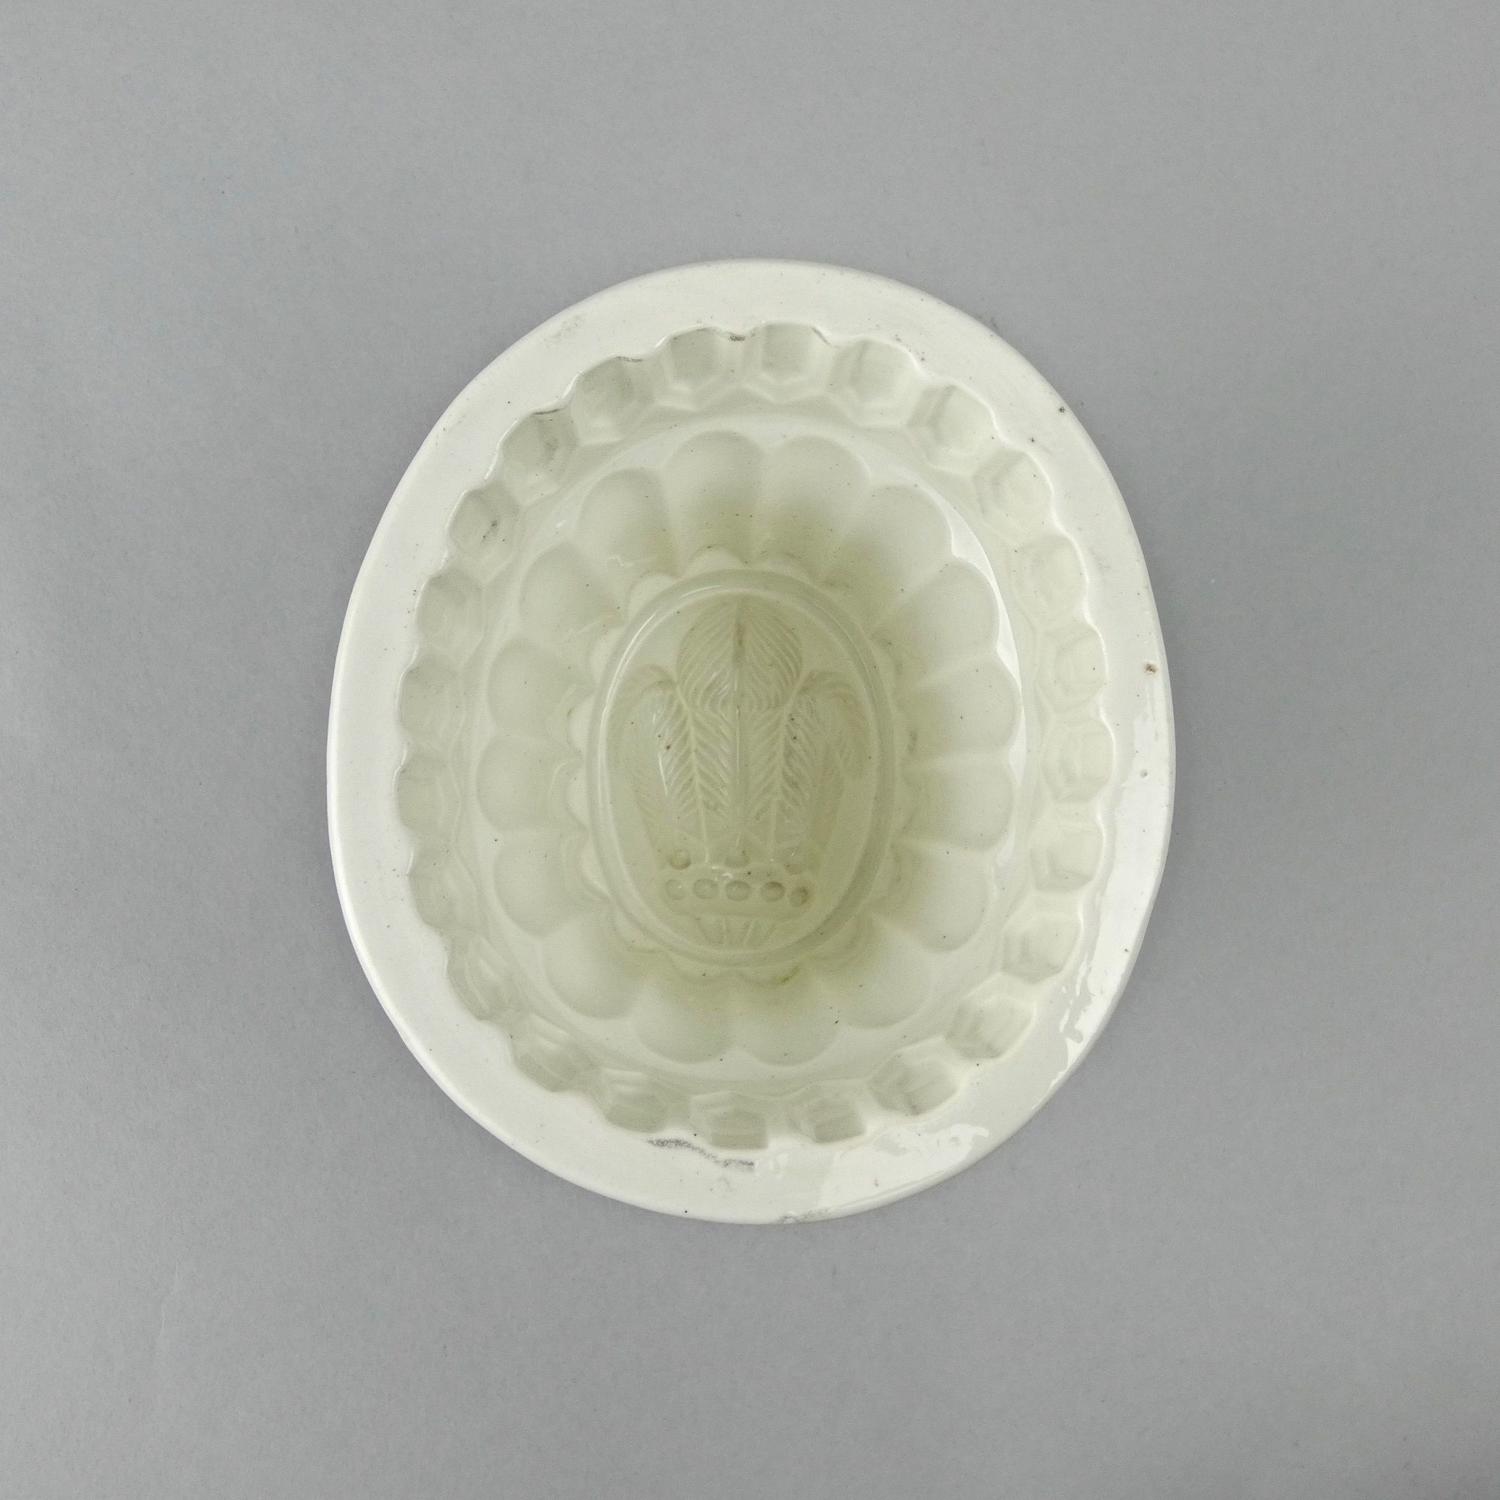 Copeland Prince of Wales feathers mould